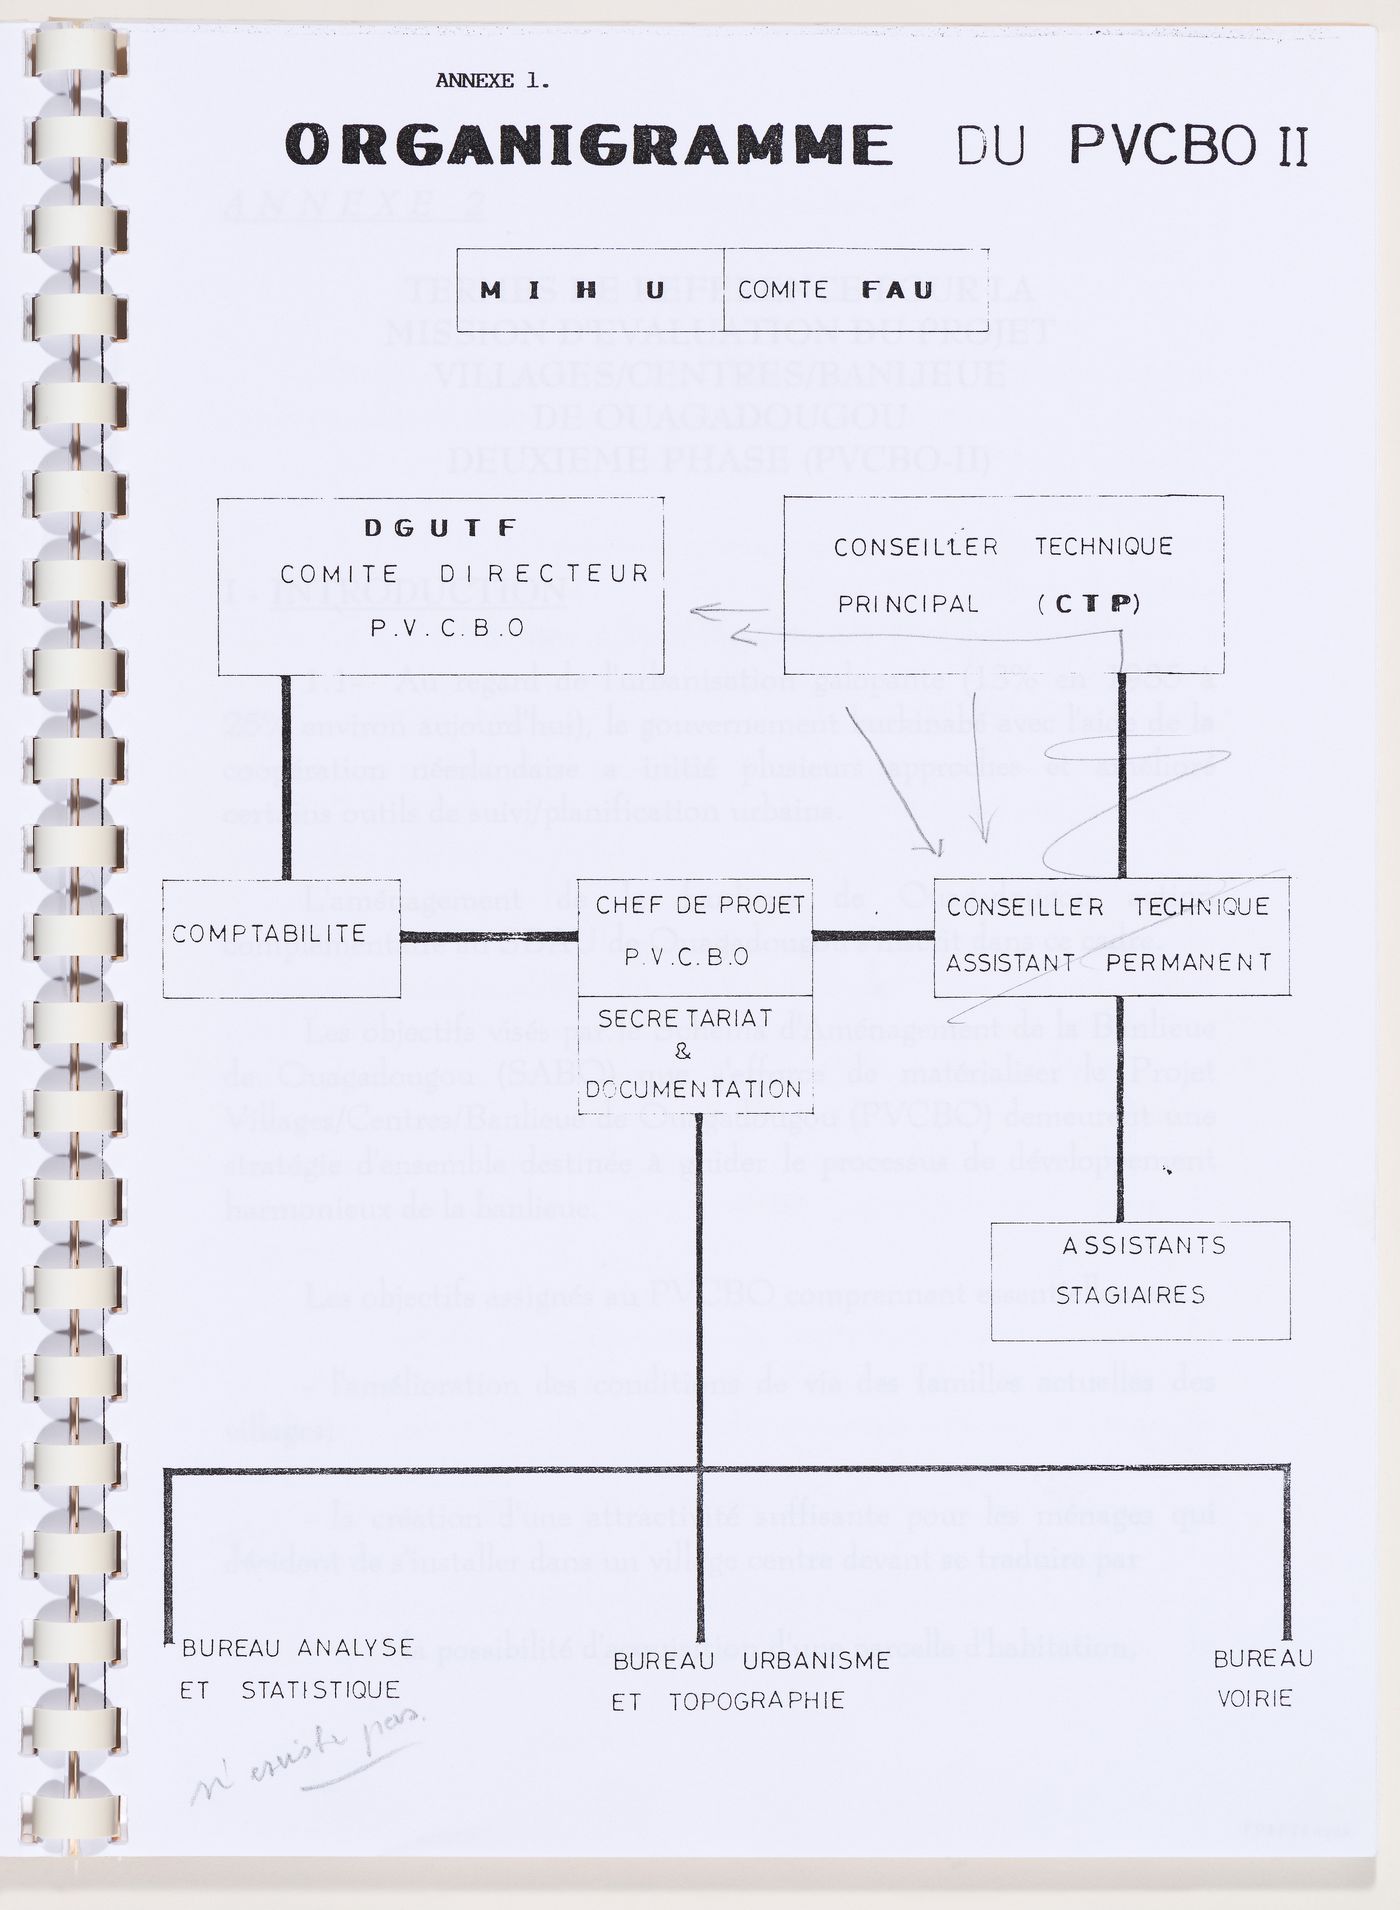 Organizational chart of the PVCBO II projet of the restructuring of the Ouagadougou suburbs, Burkina Faso